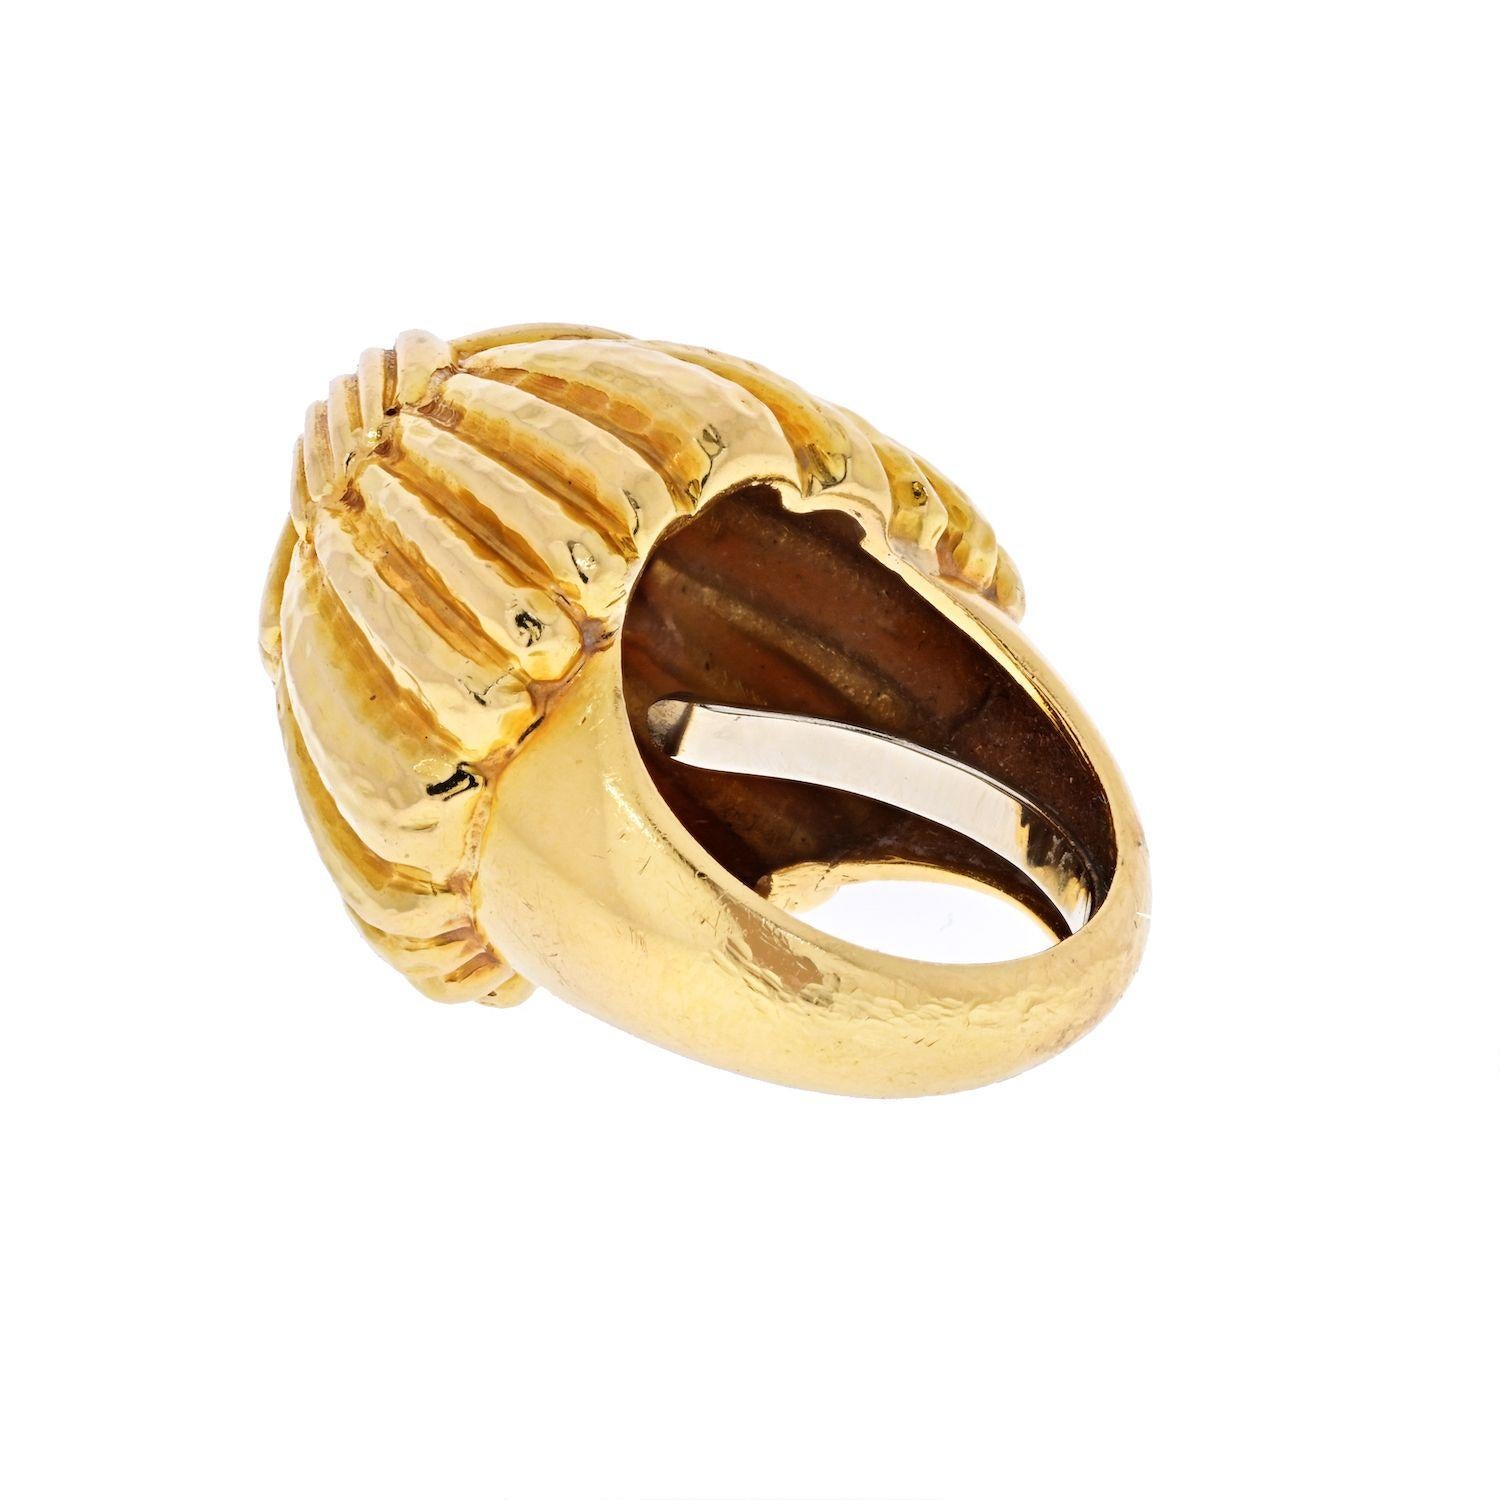 This is a high dome yellow gold ring with a cross over pattern by David Webb. Simple and elegant for your everyday wear this designer ring will certainly become one of your faves.
Size 6.5